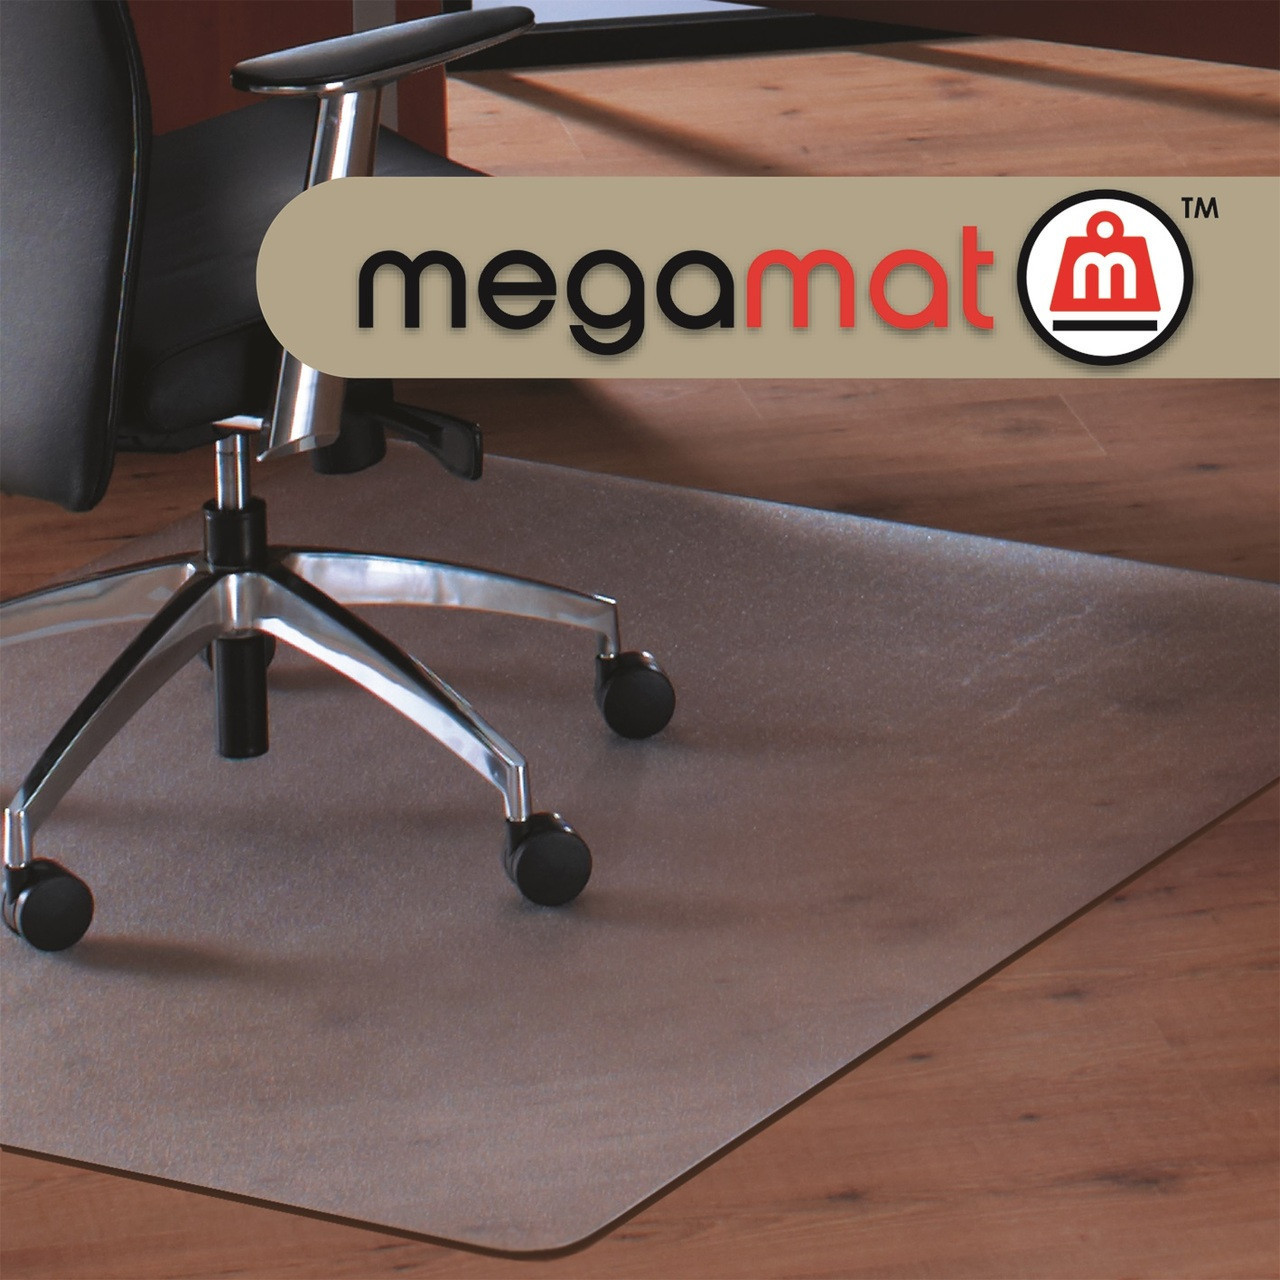 https://cdn11.bigcommerce.com/s-fjwps1jbkv/images/stencil/1280x1280/products/247/3007/cleartex-megamat-or-heavy-duty-chair-mat-for-hard-floors-and-all-pile-carpets-or-rectangular-or-multiple-sizes__32067.1688987686.jpg?c=2?imbypass=on